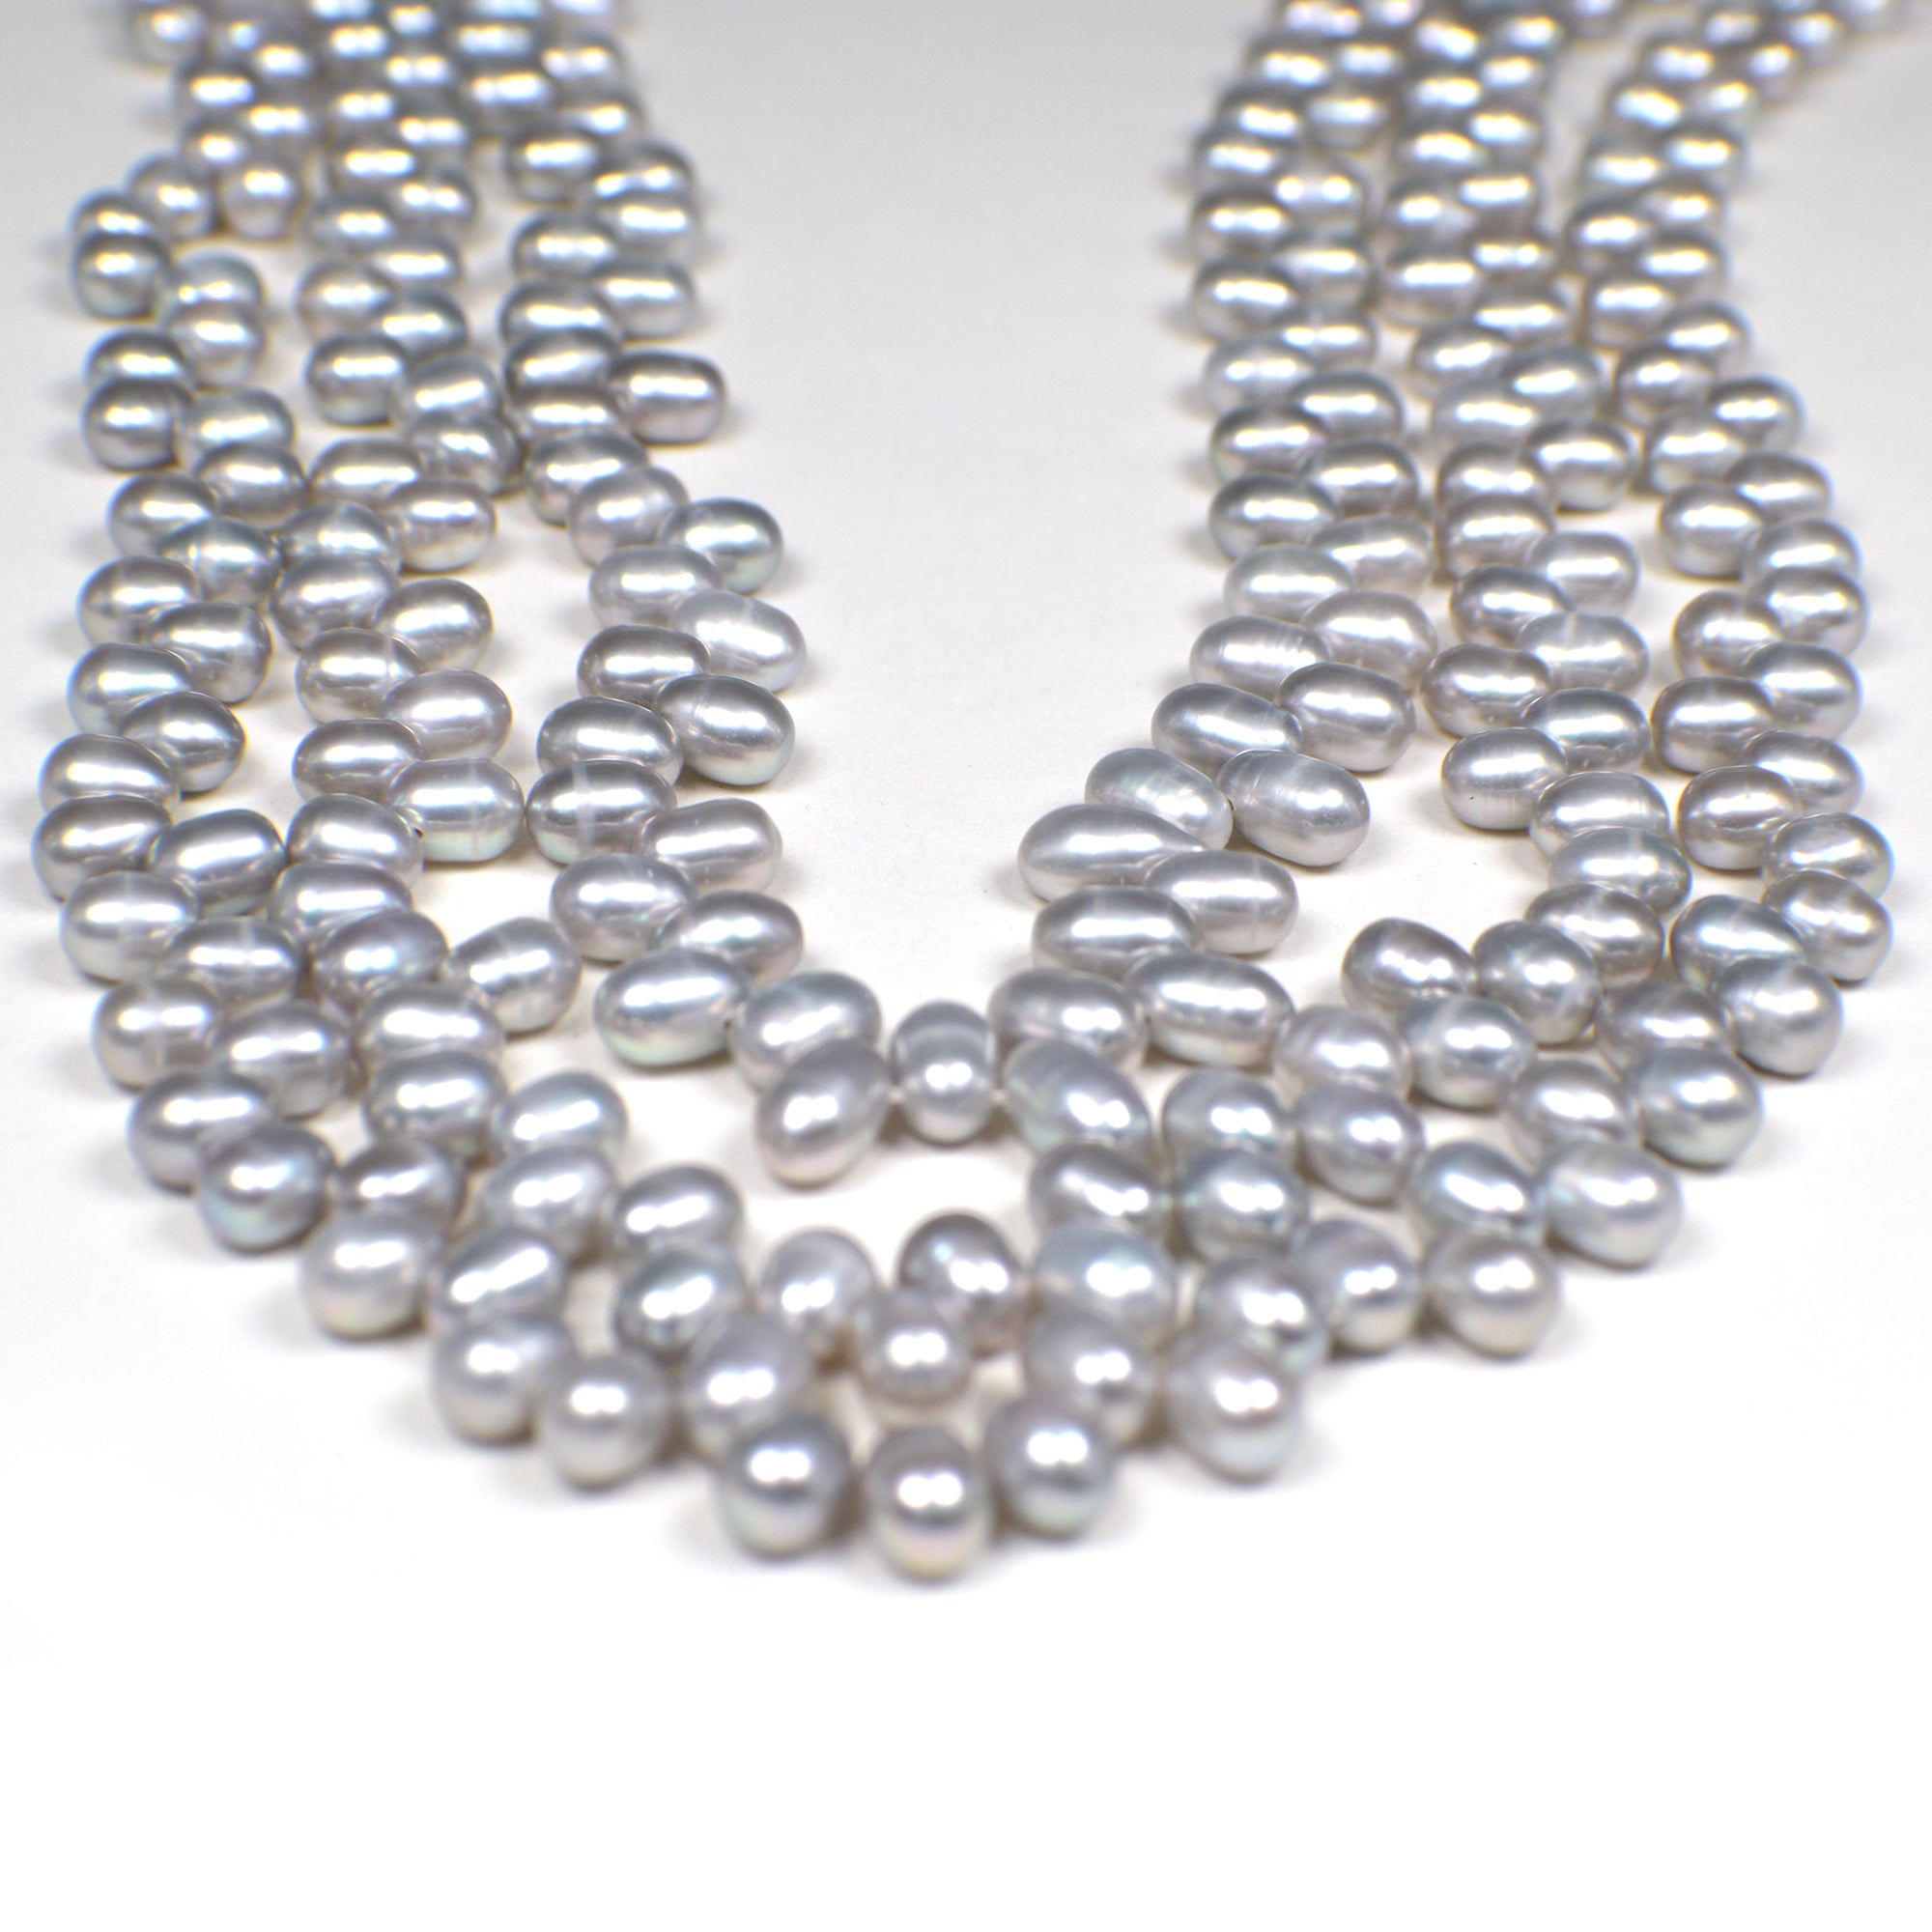 6x5 - 7x5 MM Gray Rice Freshwater Pearls Beads